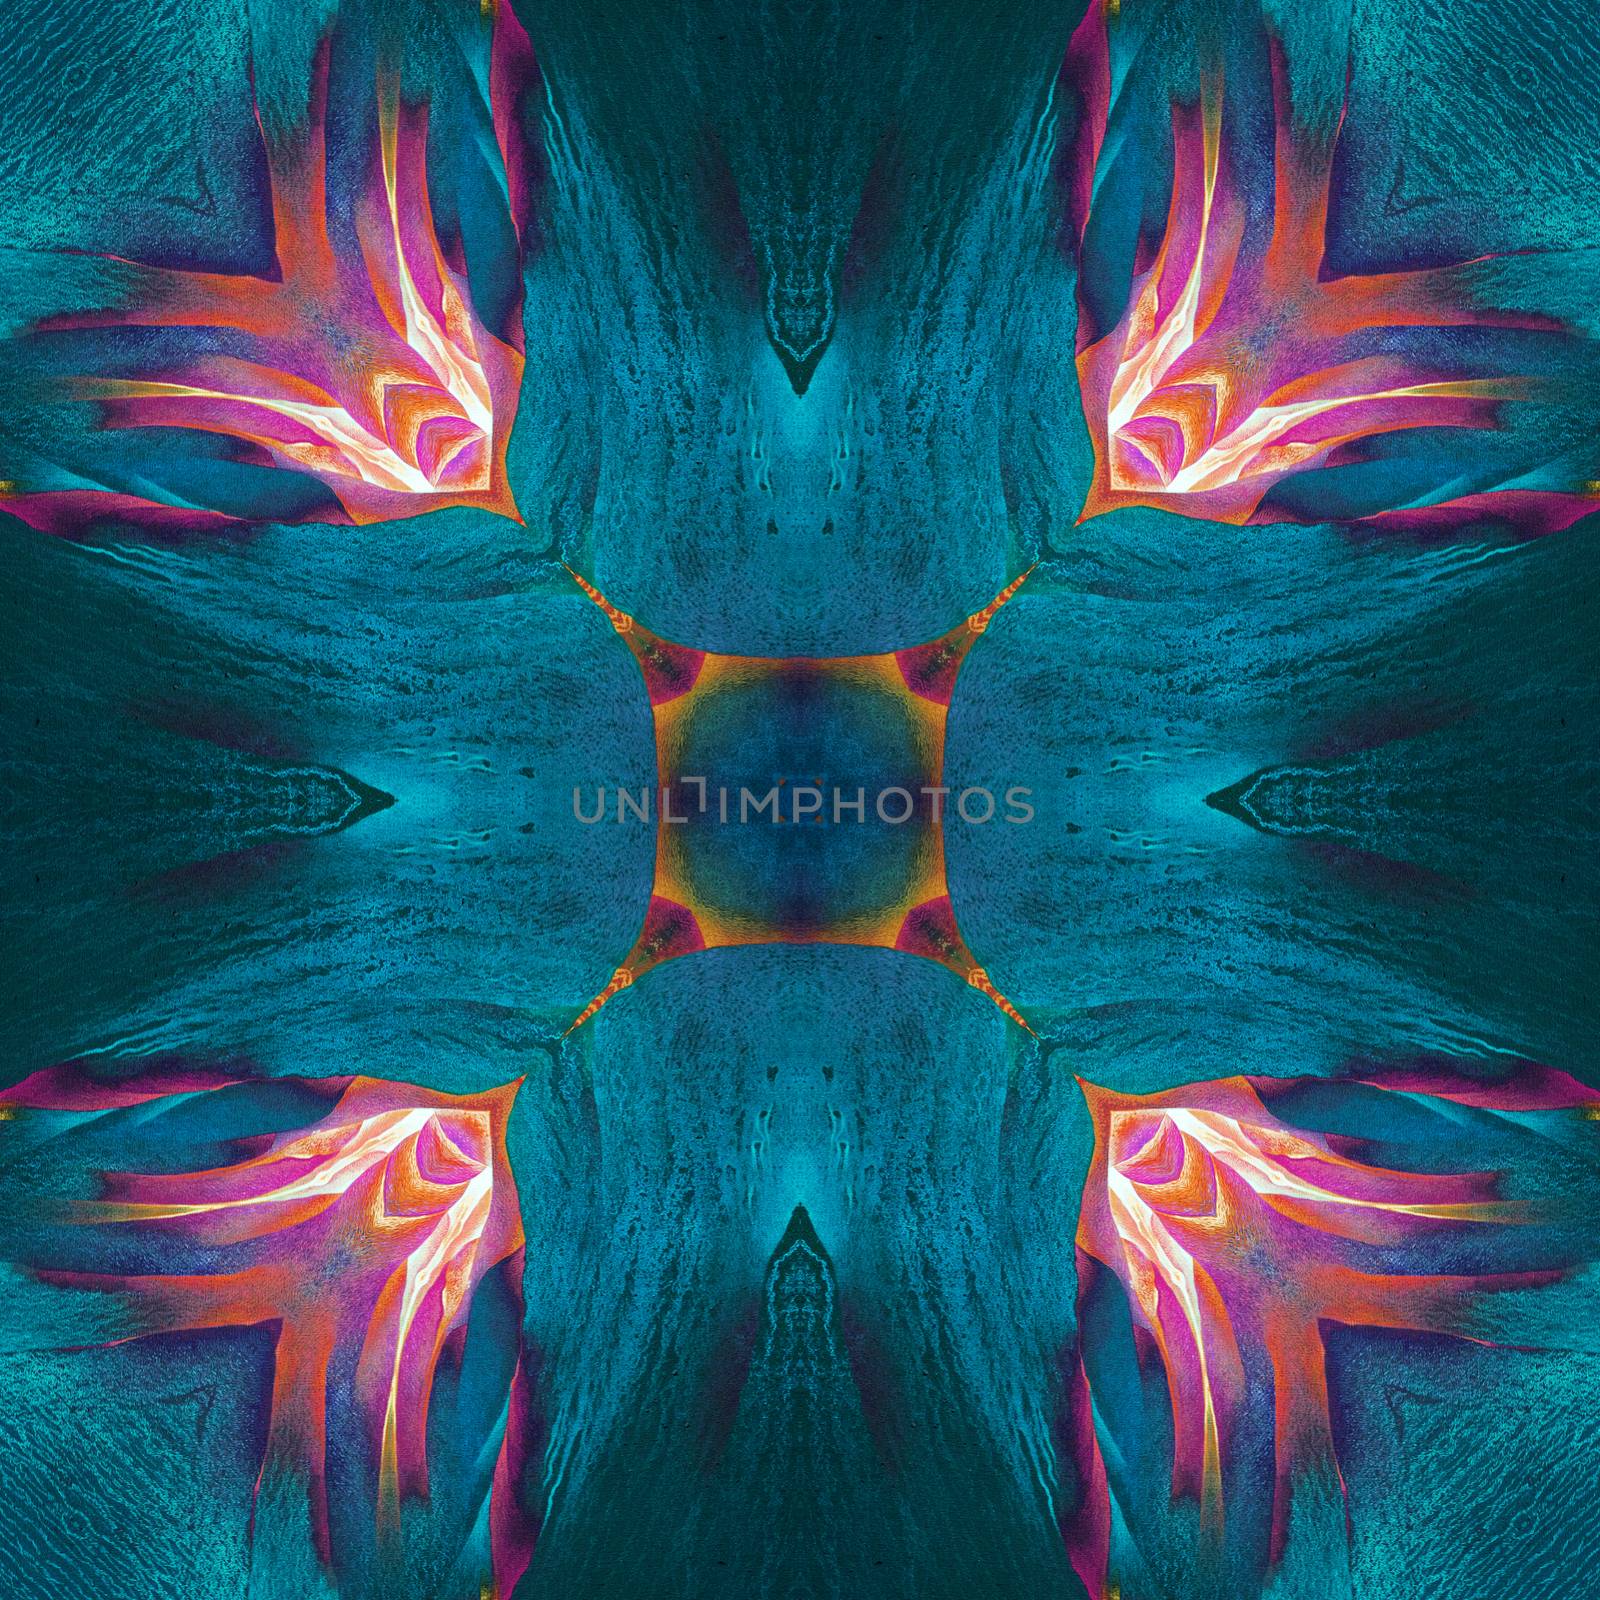 Abstract kaleidoscope or endless pattern made from fabric for background used.